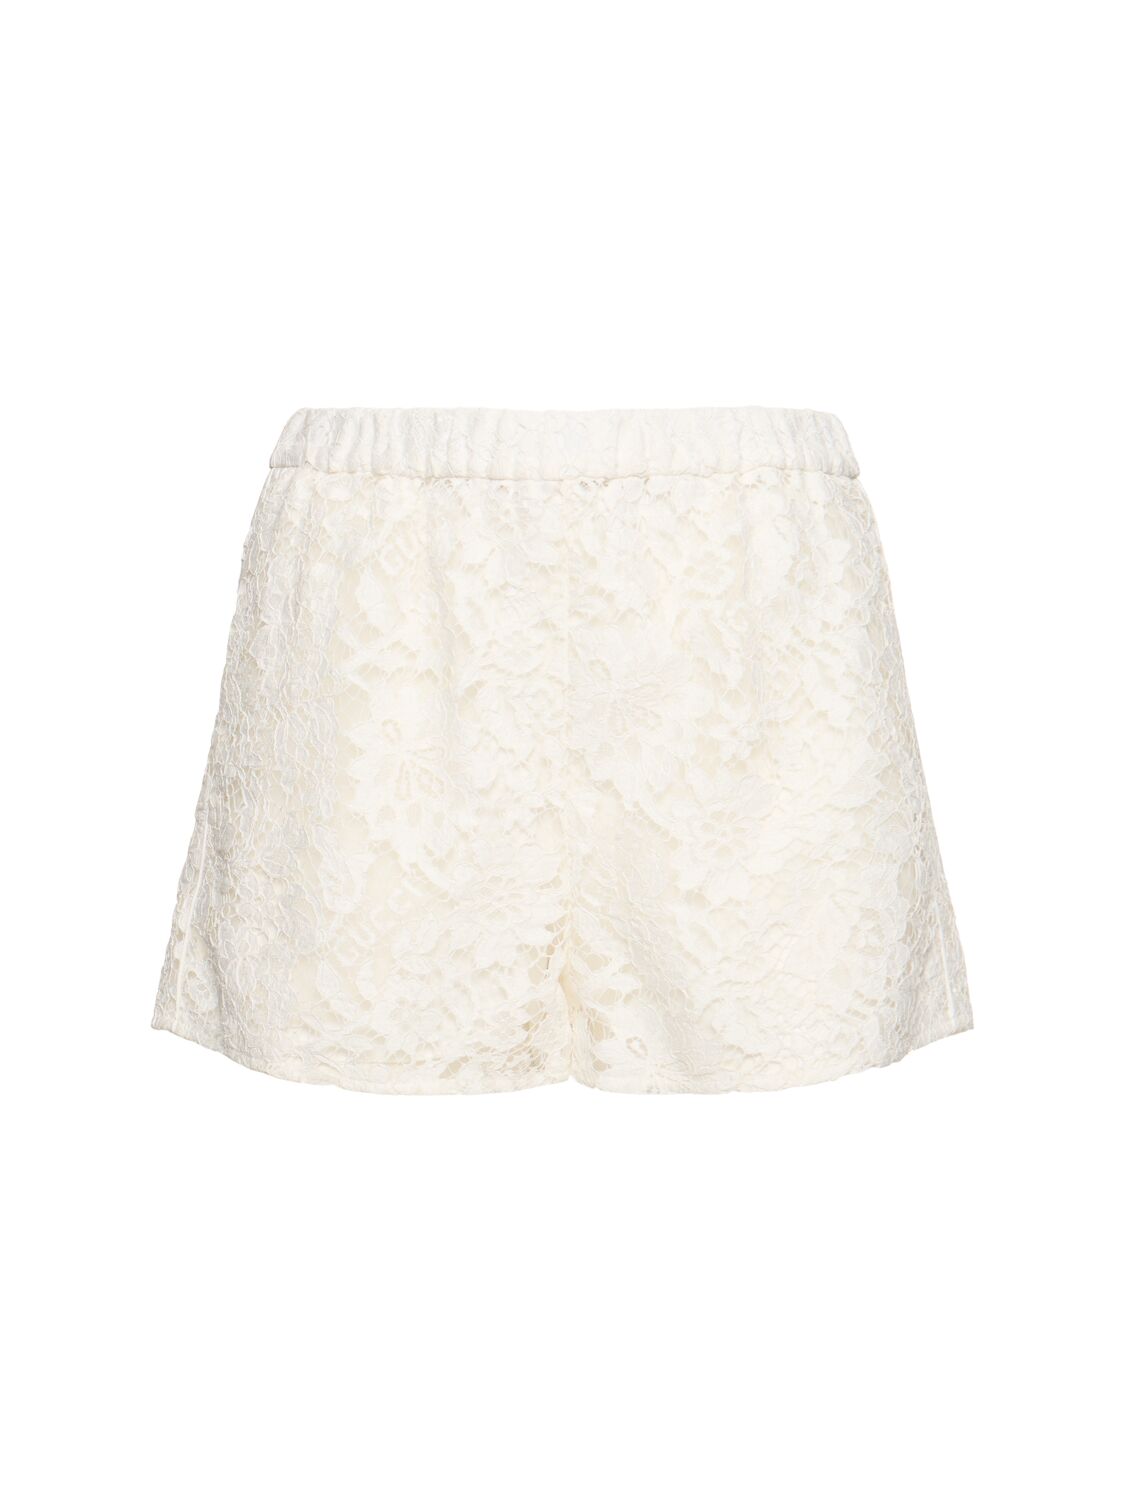 Image of Silk Blend Lace Shorts